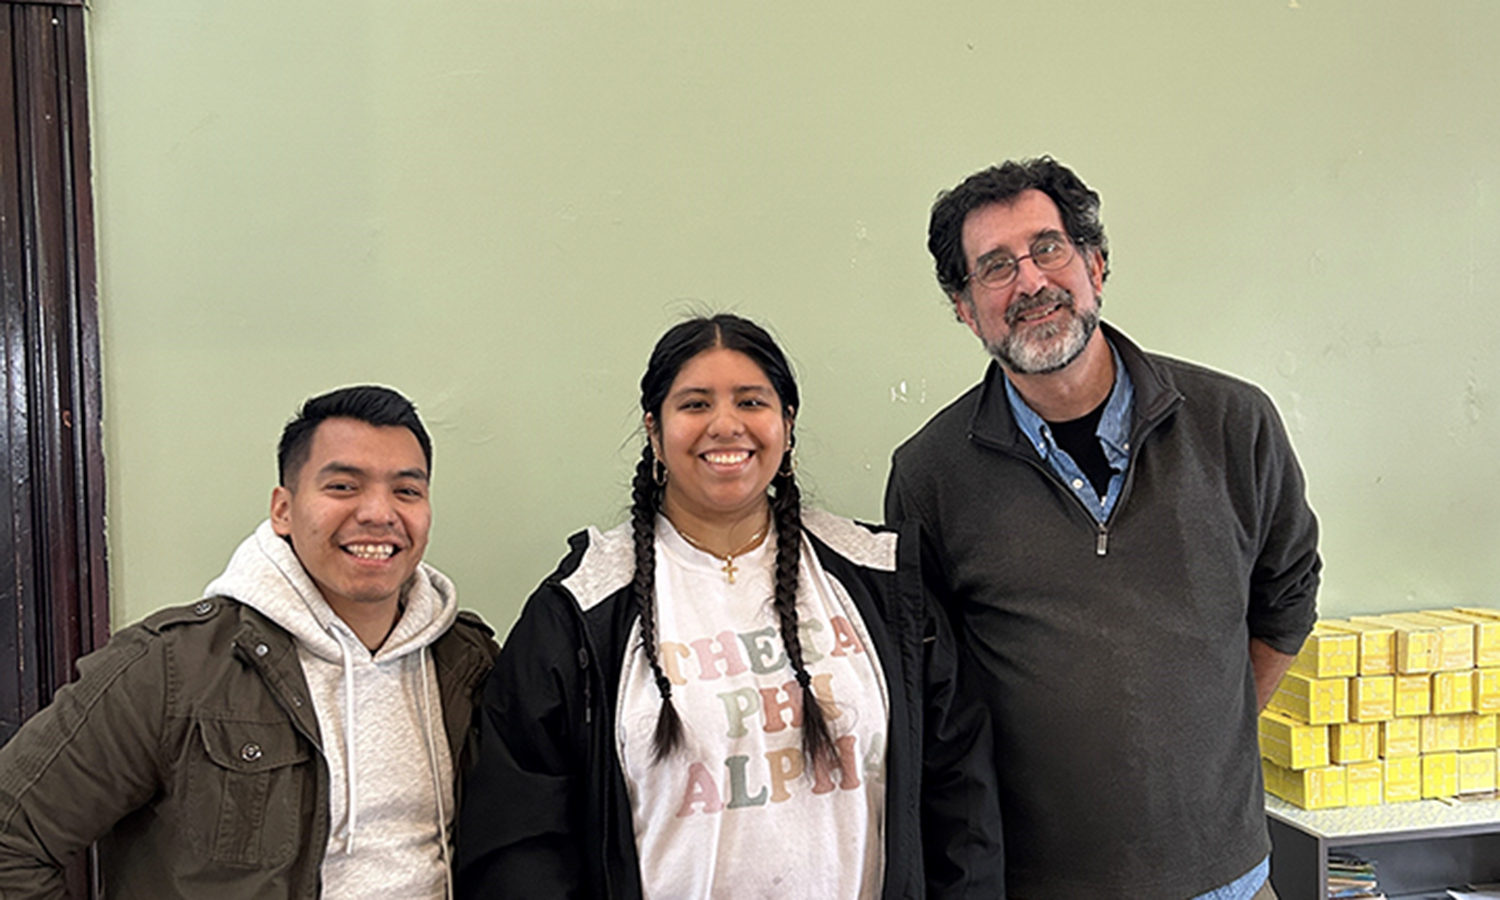 Rural and Migrant Ministry’s Western NY Regional Coordinator Wilmer Jimenez and Executive Director Richard Witt are joined by Natalie Sandoval '25, who volunteered there during Spring Break.